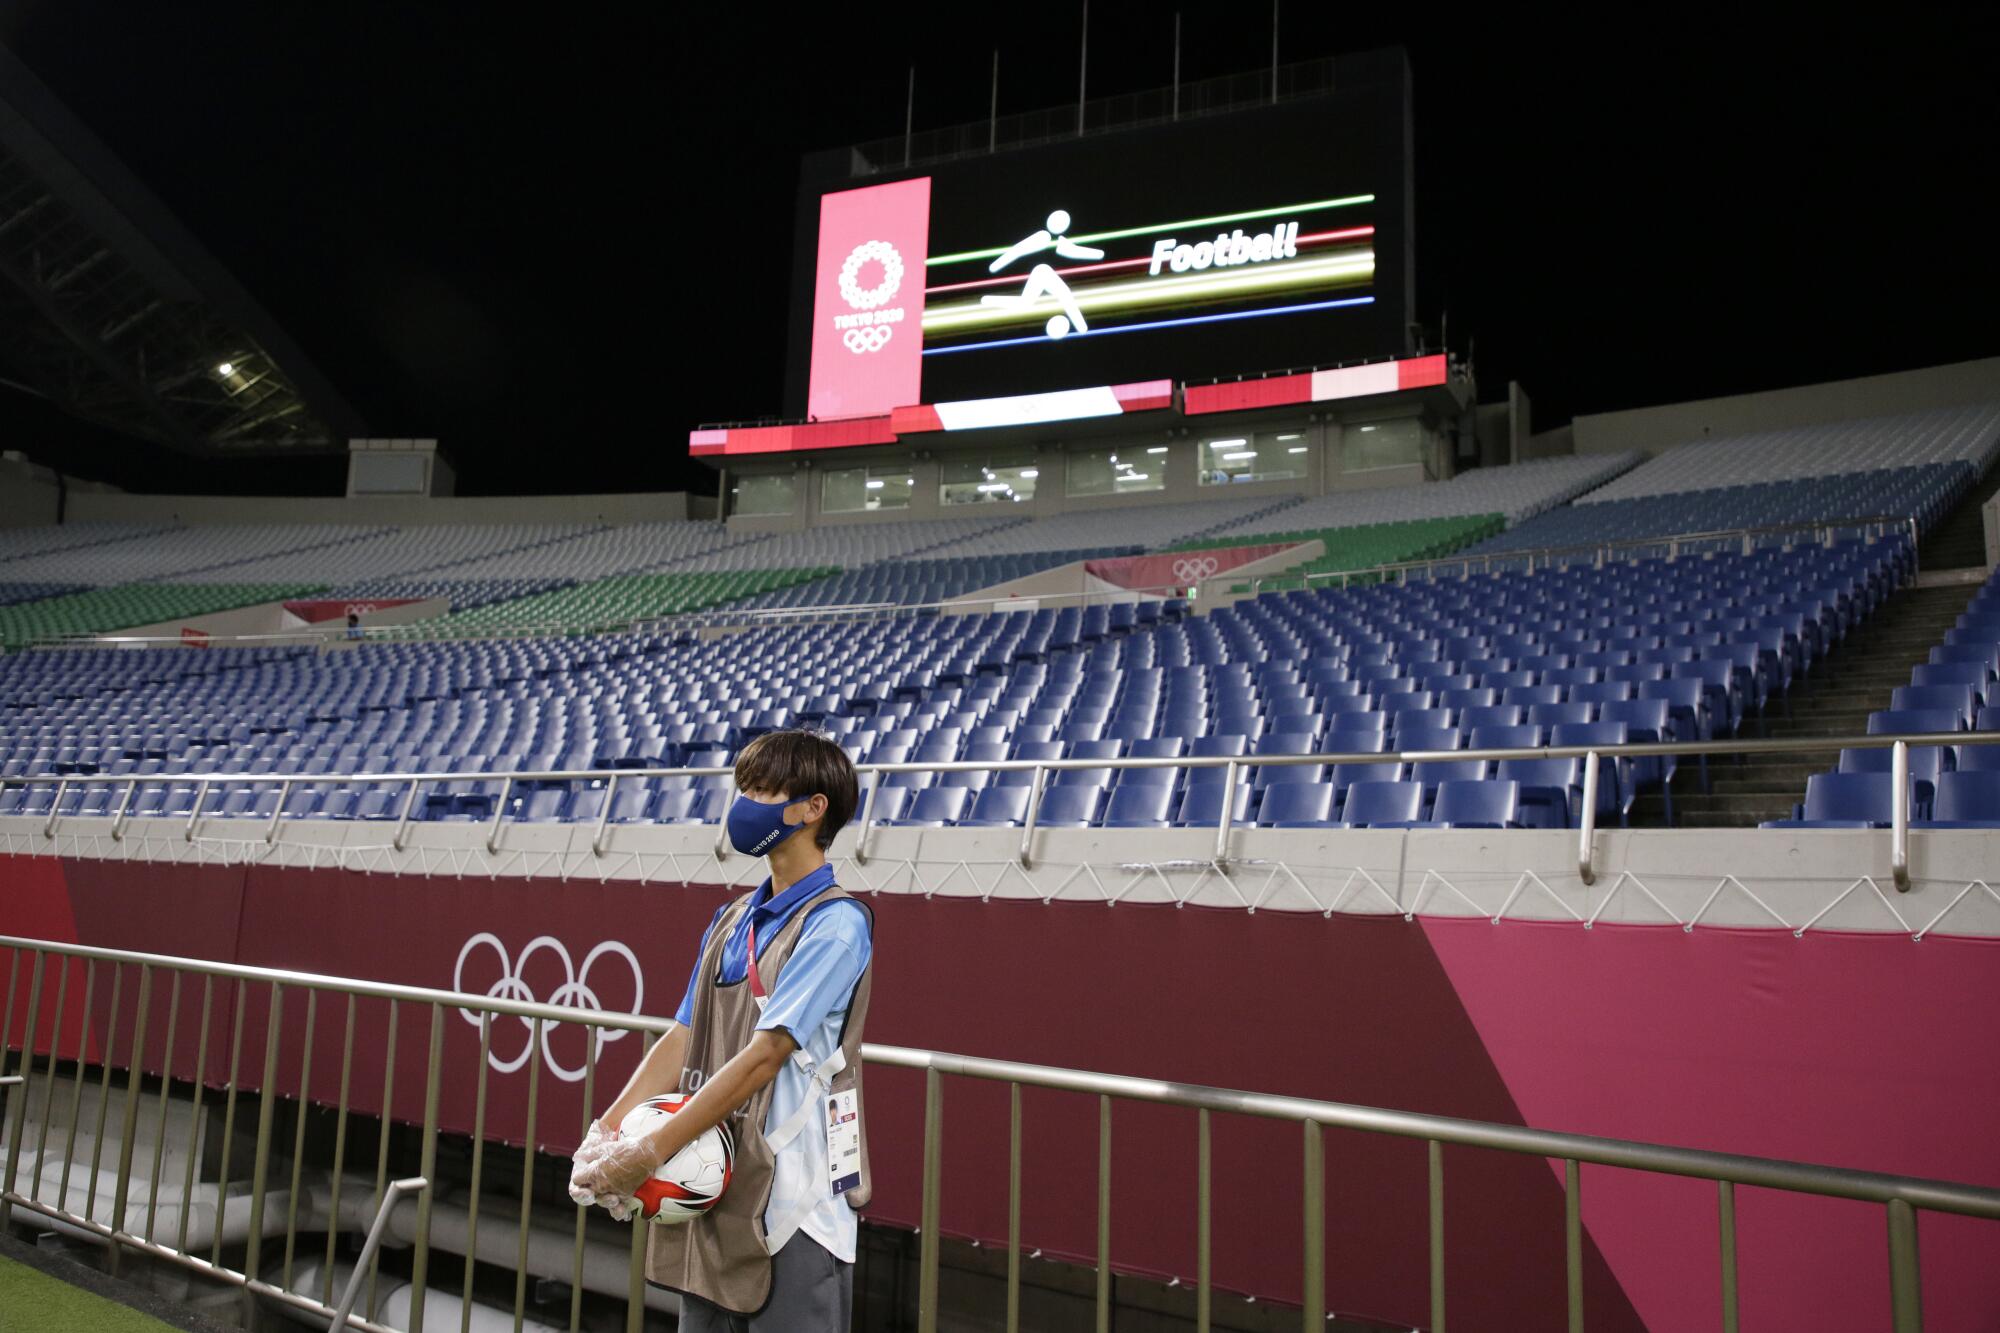 A boy holds a soccer ball. On the wall of the empty stadium behind him are the Olympic rings.